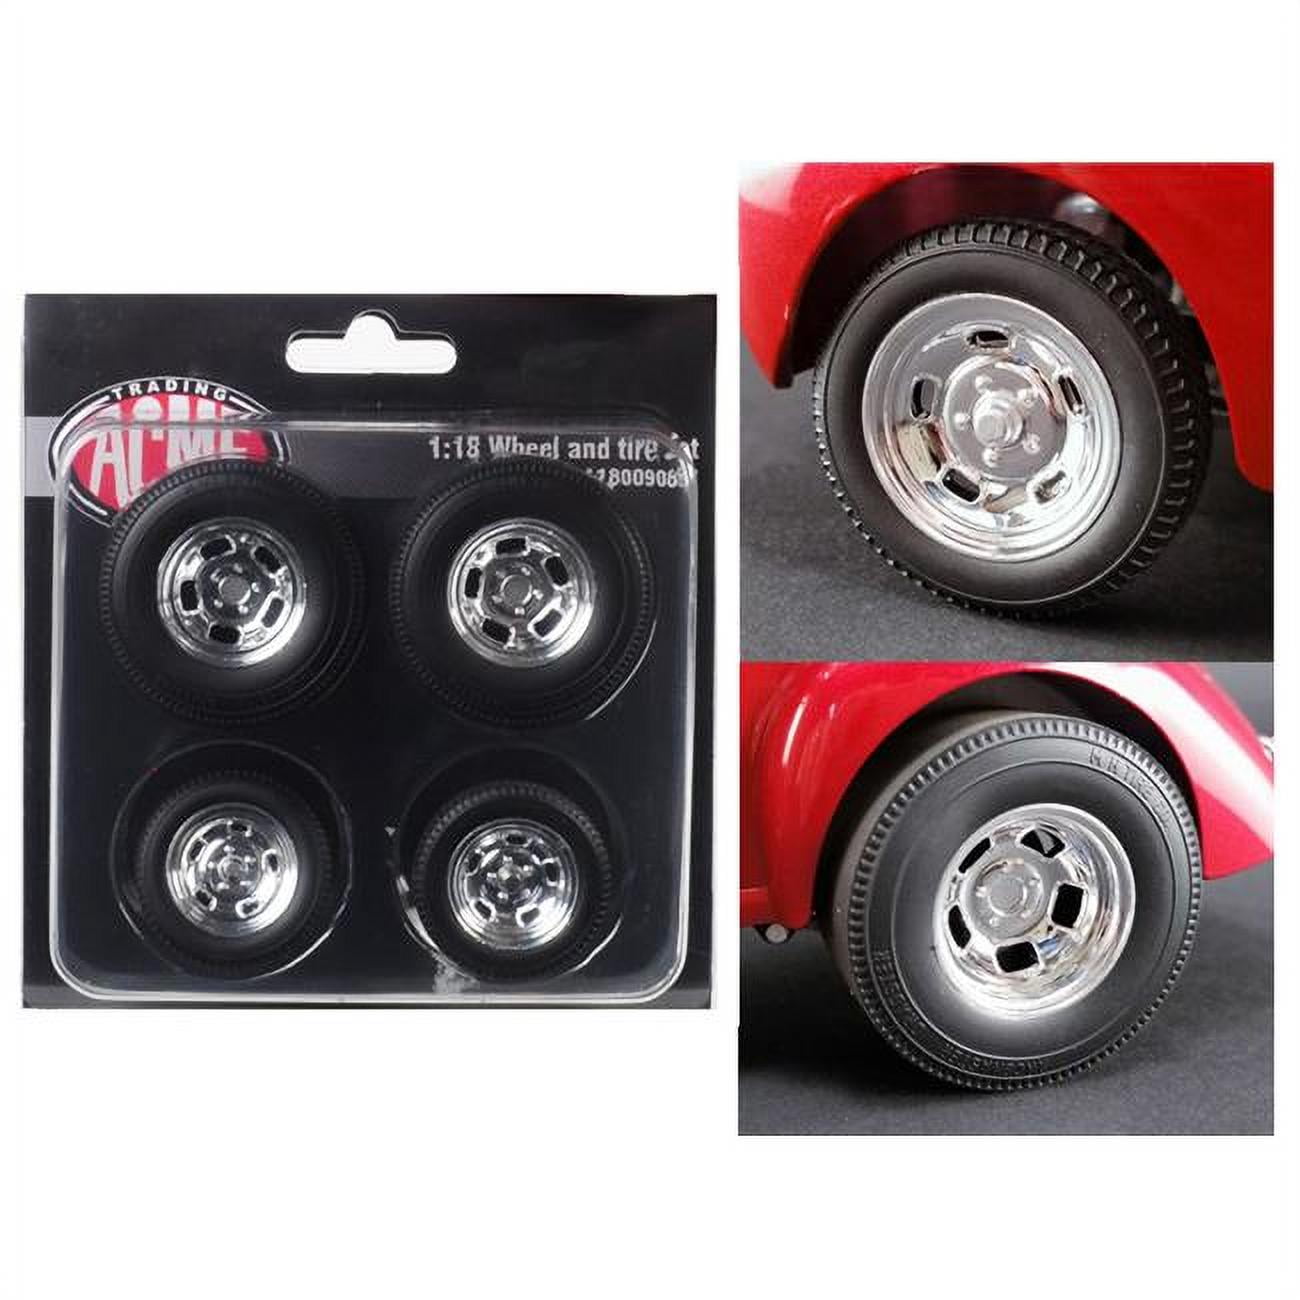 Picture of ACME A1800908W 1 isto 18 Polished Drag Wheels & Tires from 1941 Gasser&#44; 4 Piece